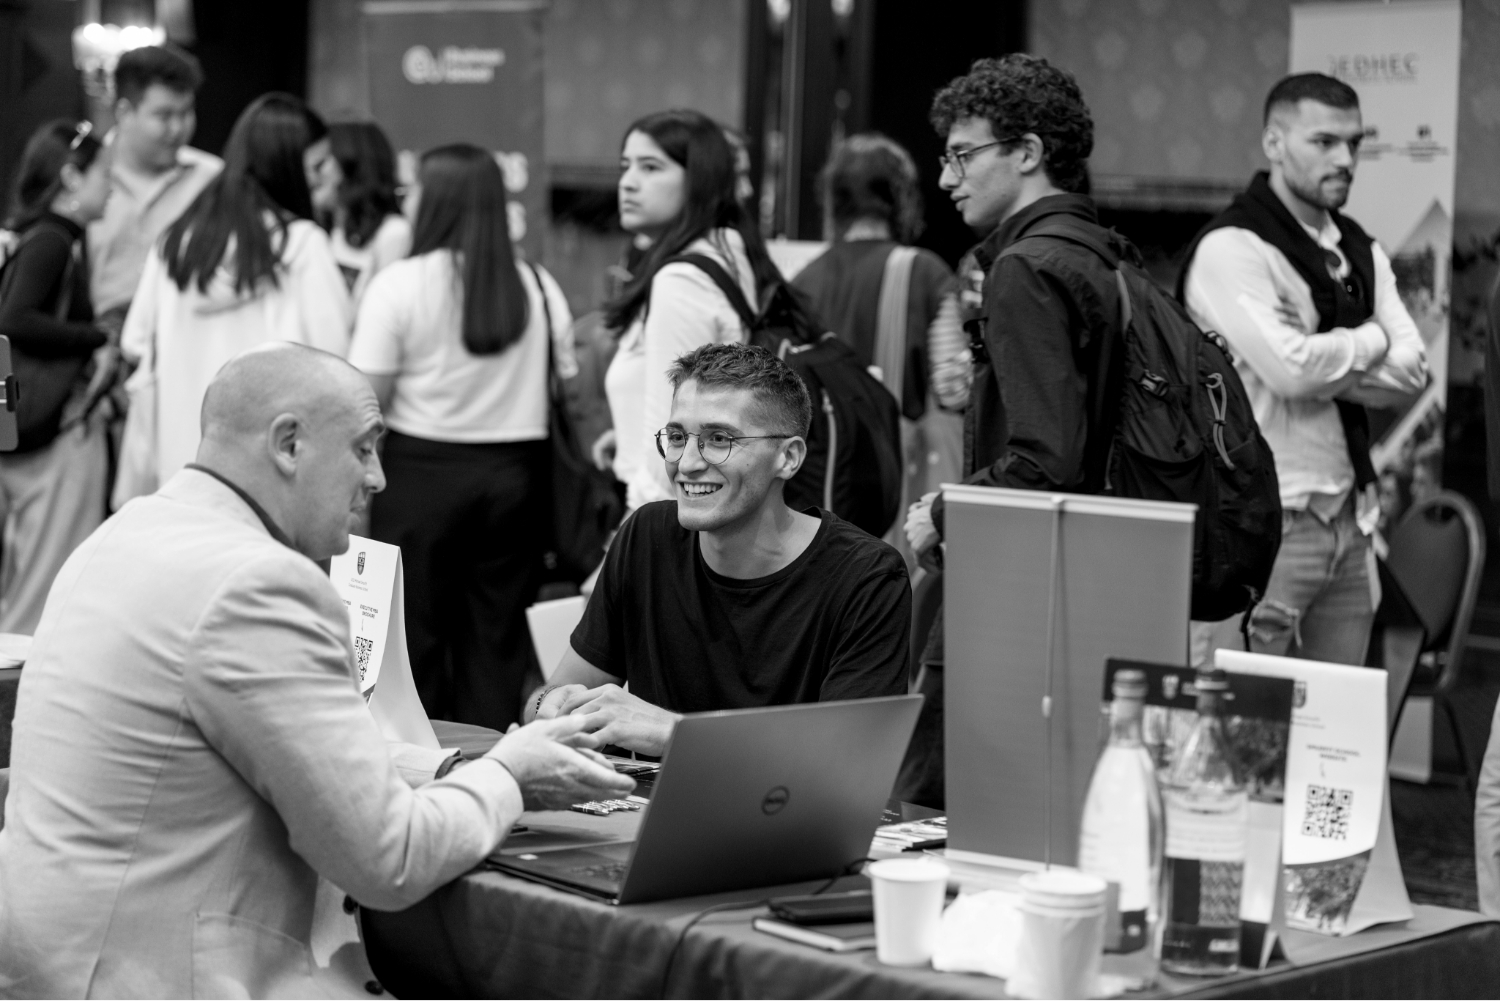 A black and white photograph of two men sitting at a table during a conference with a laptop.